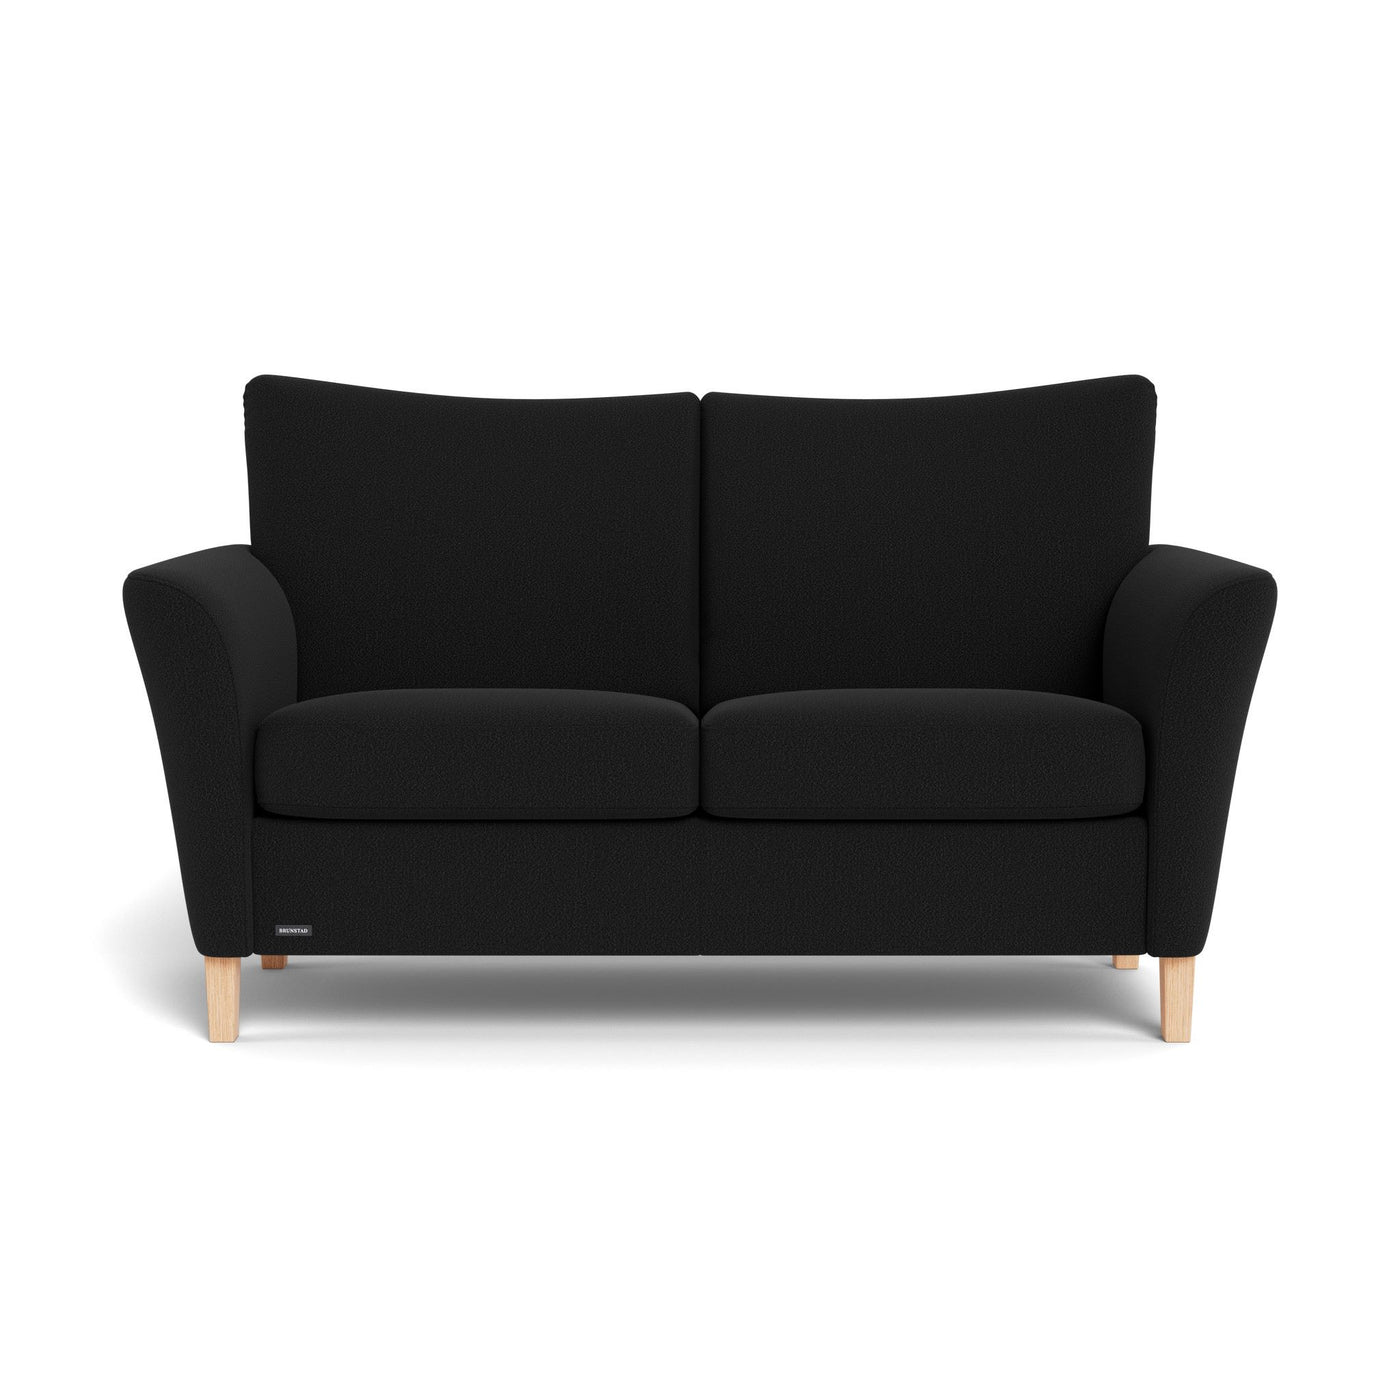 System+ | 2,5-personers sofa